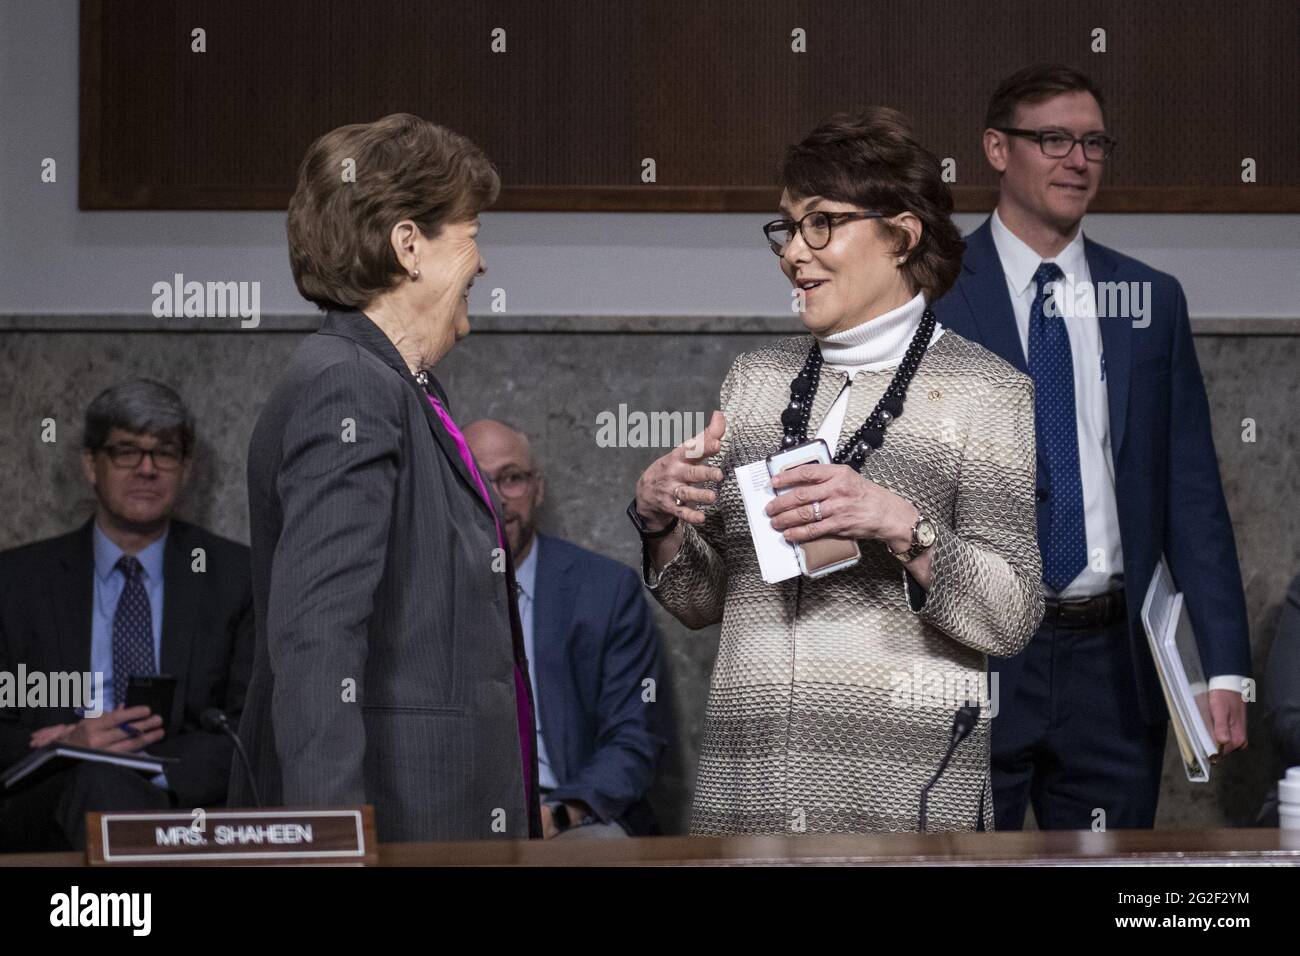 United States Senator Jeanne Shaheen (Democrat of New Hampshire), left, talks with United States Senator Jacky Rosen (Democrat of Nevada), right, during a Senate Committee on Armed Services hearing to examine the Department of Defense budget posture in review of the Defense Authorization Request for fiscal year 2022, in the Dirksen Senate Office Building in Washington, DC, Thursday, June 10, 2021. Photo by Rod Lamkey/CNP/ABACAPRESS.COM Stock Photo